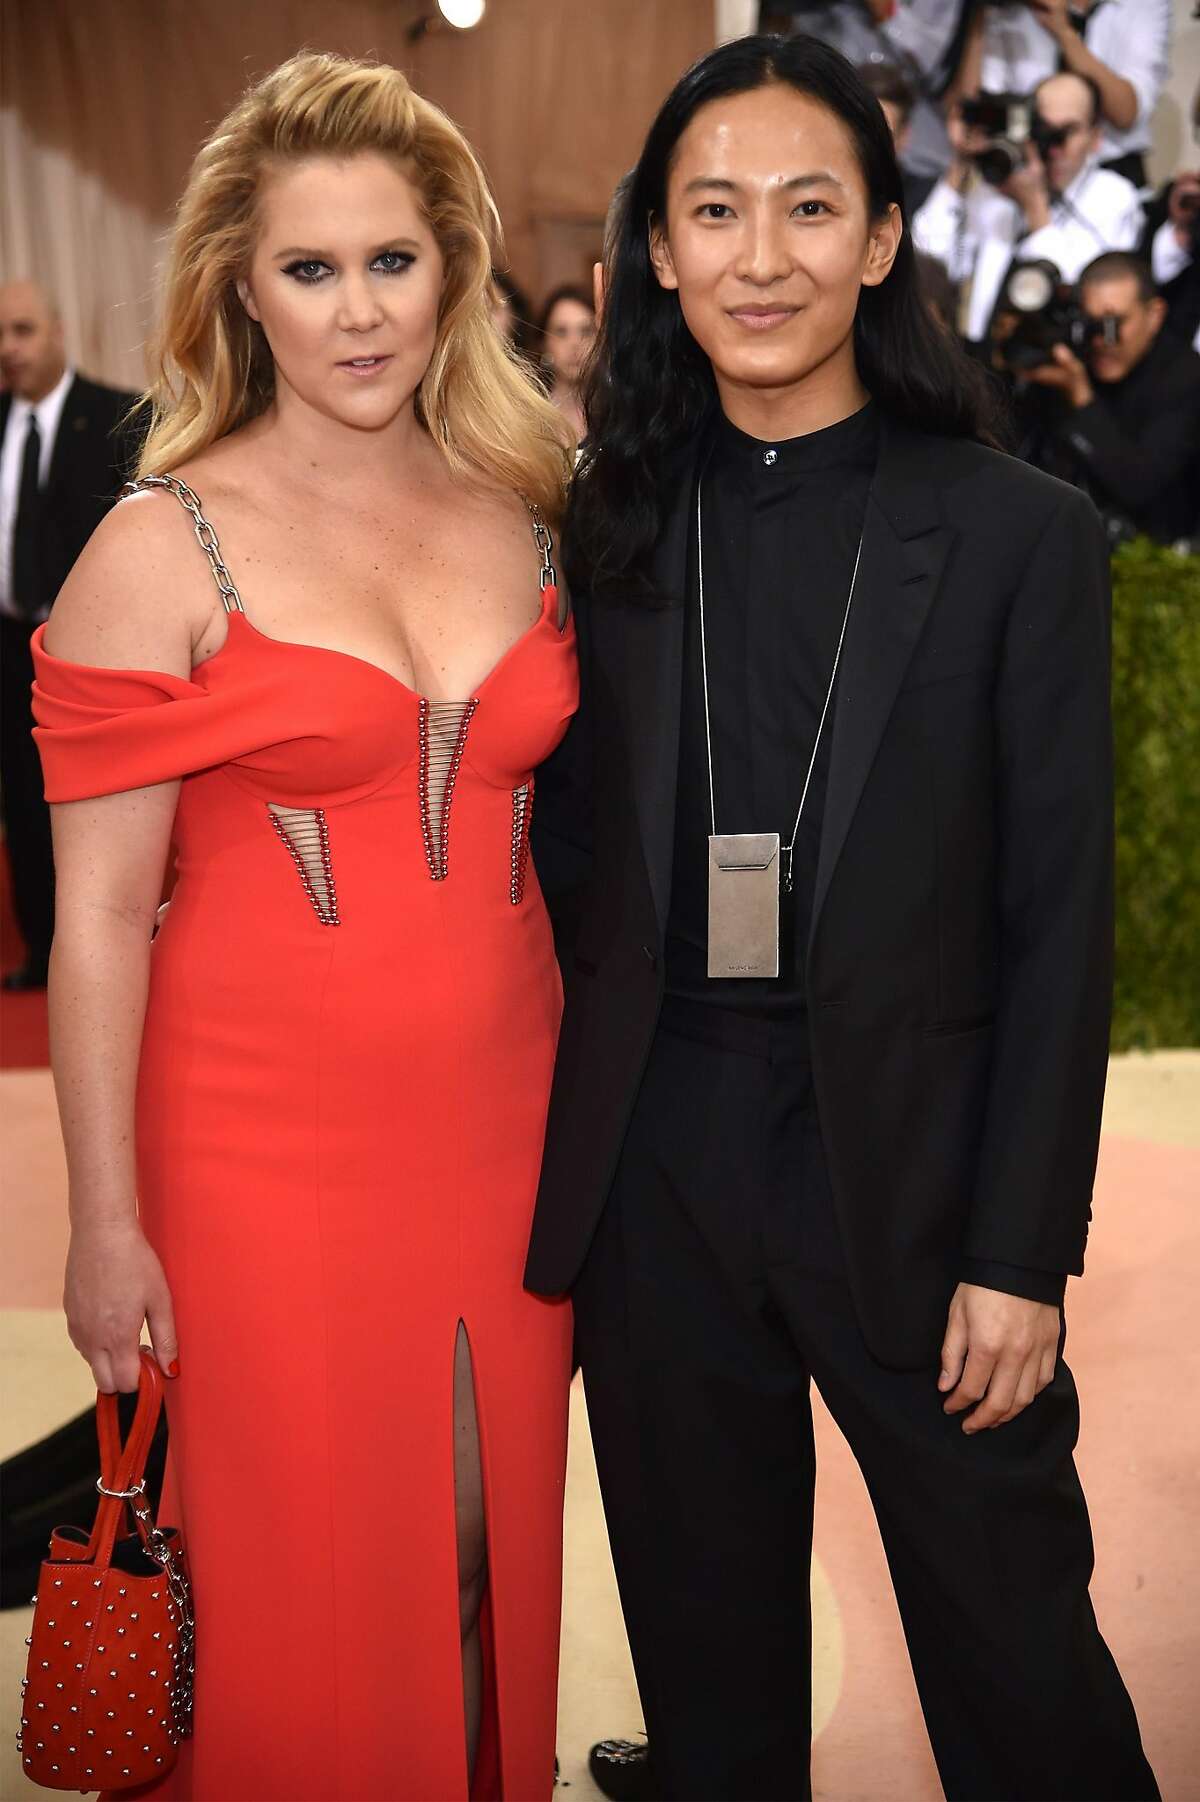 NEW YORK, NY - MAY 02: Amy Schumer and Alexander Wang attend the "Manus x Machina: Fashion In An Age Of Technology" Costume Institute Gala at Metropolitan Museum of Art on May 2, 2016 in New York City. (Photo by Dimitrios Kambouris/Getty Images)